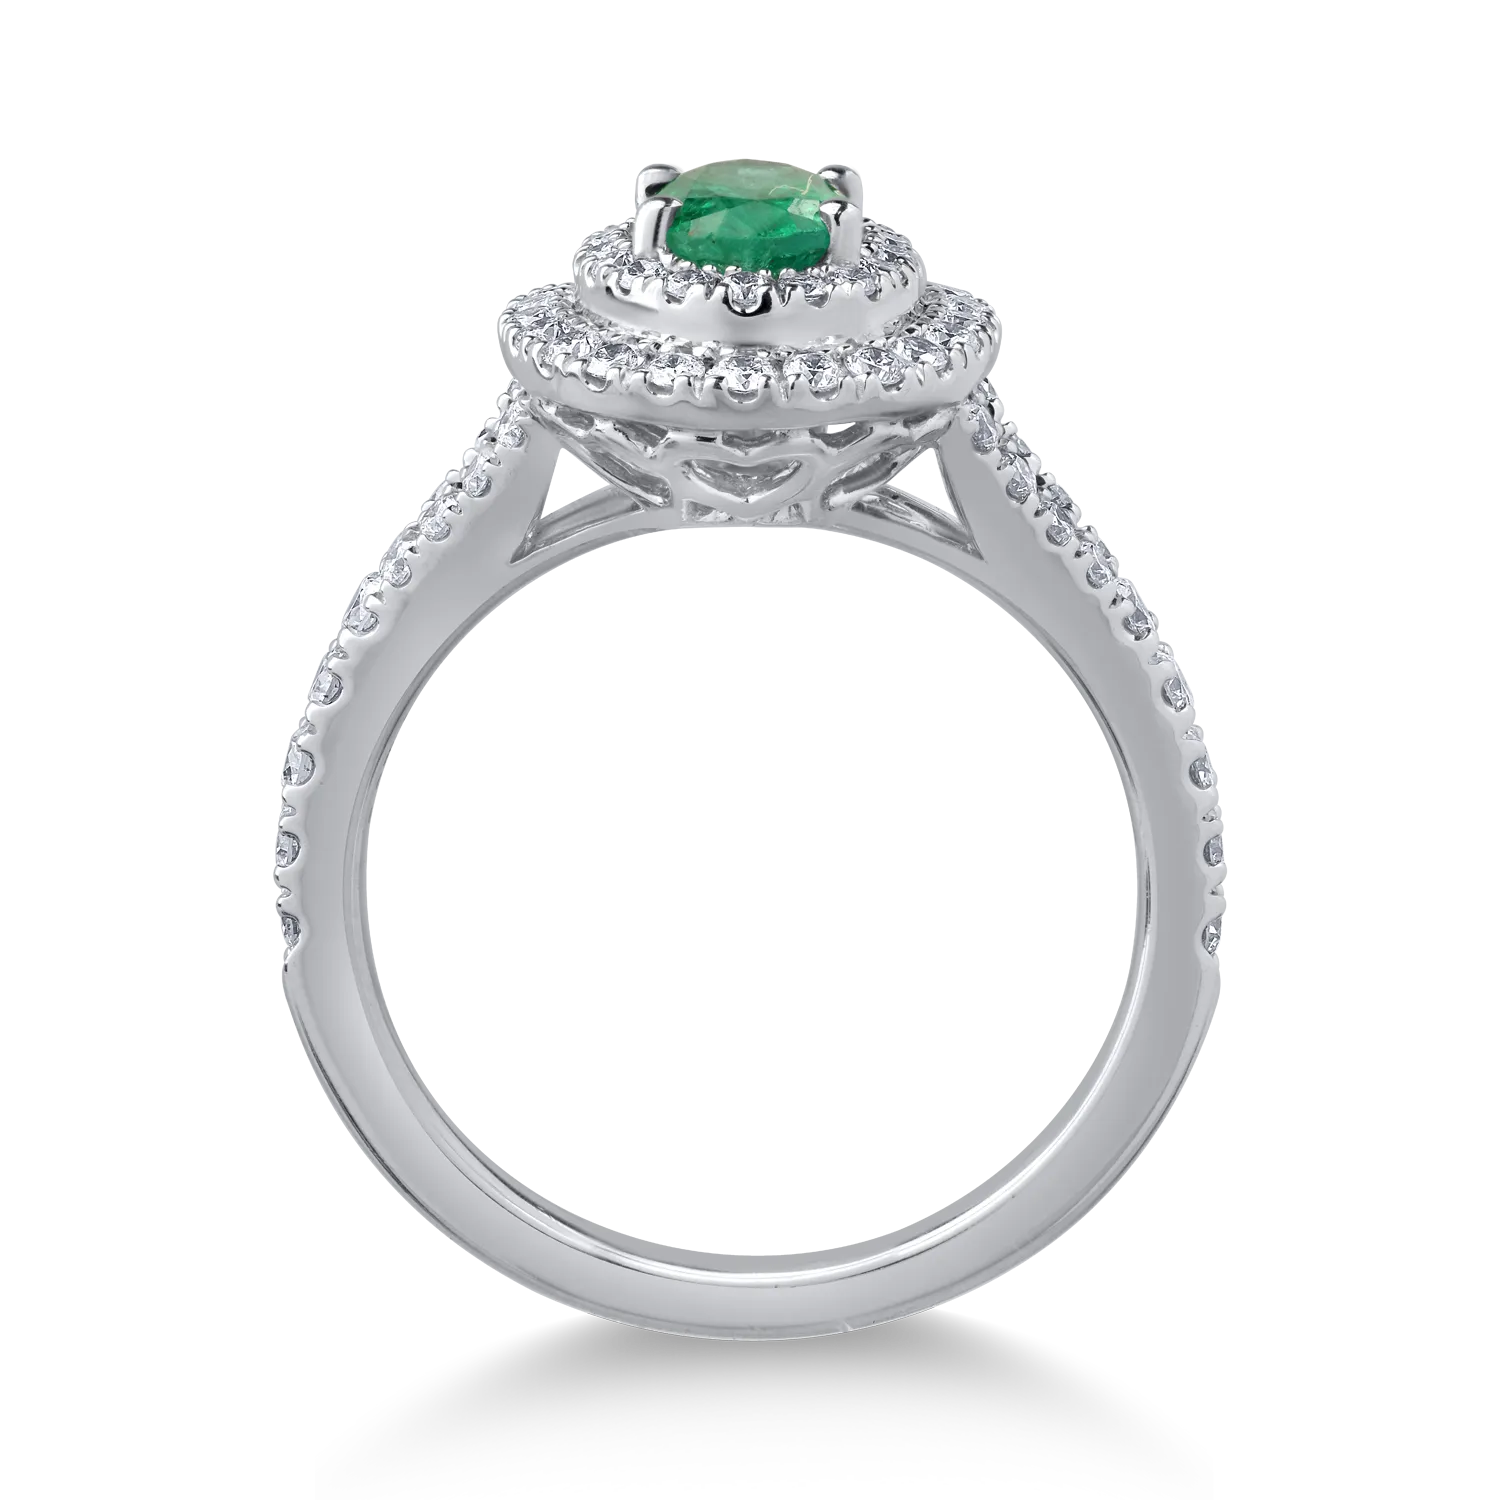 18K white gold ring with 0.61ct emerald and 0.67ct diamonds